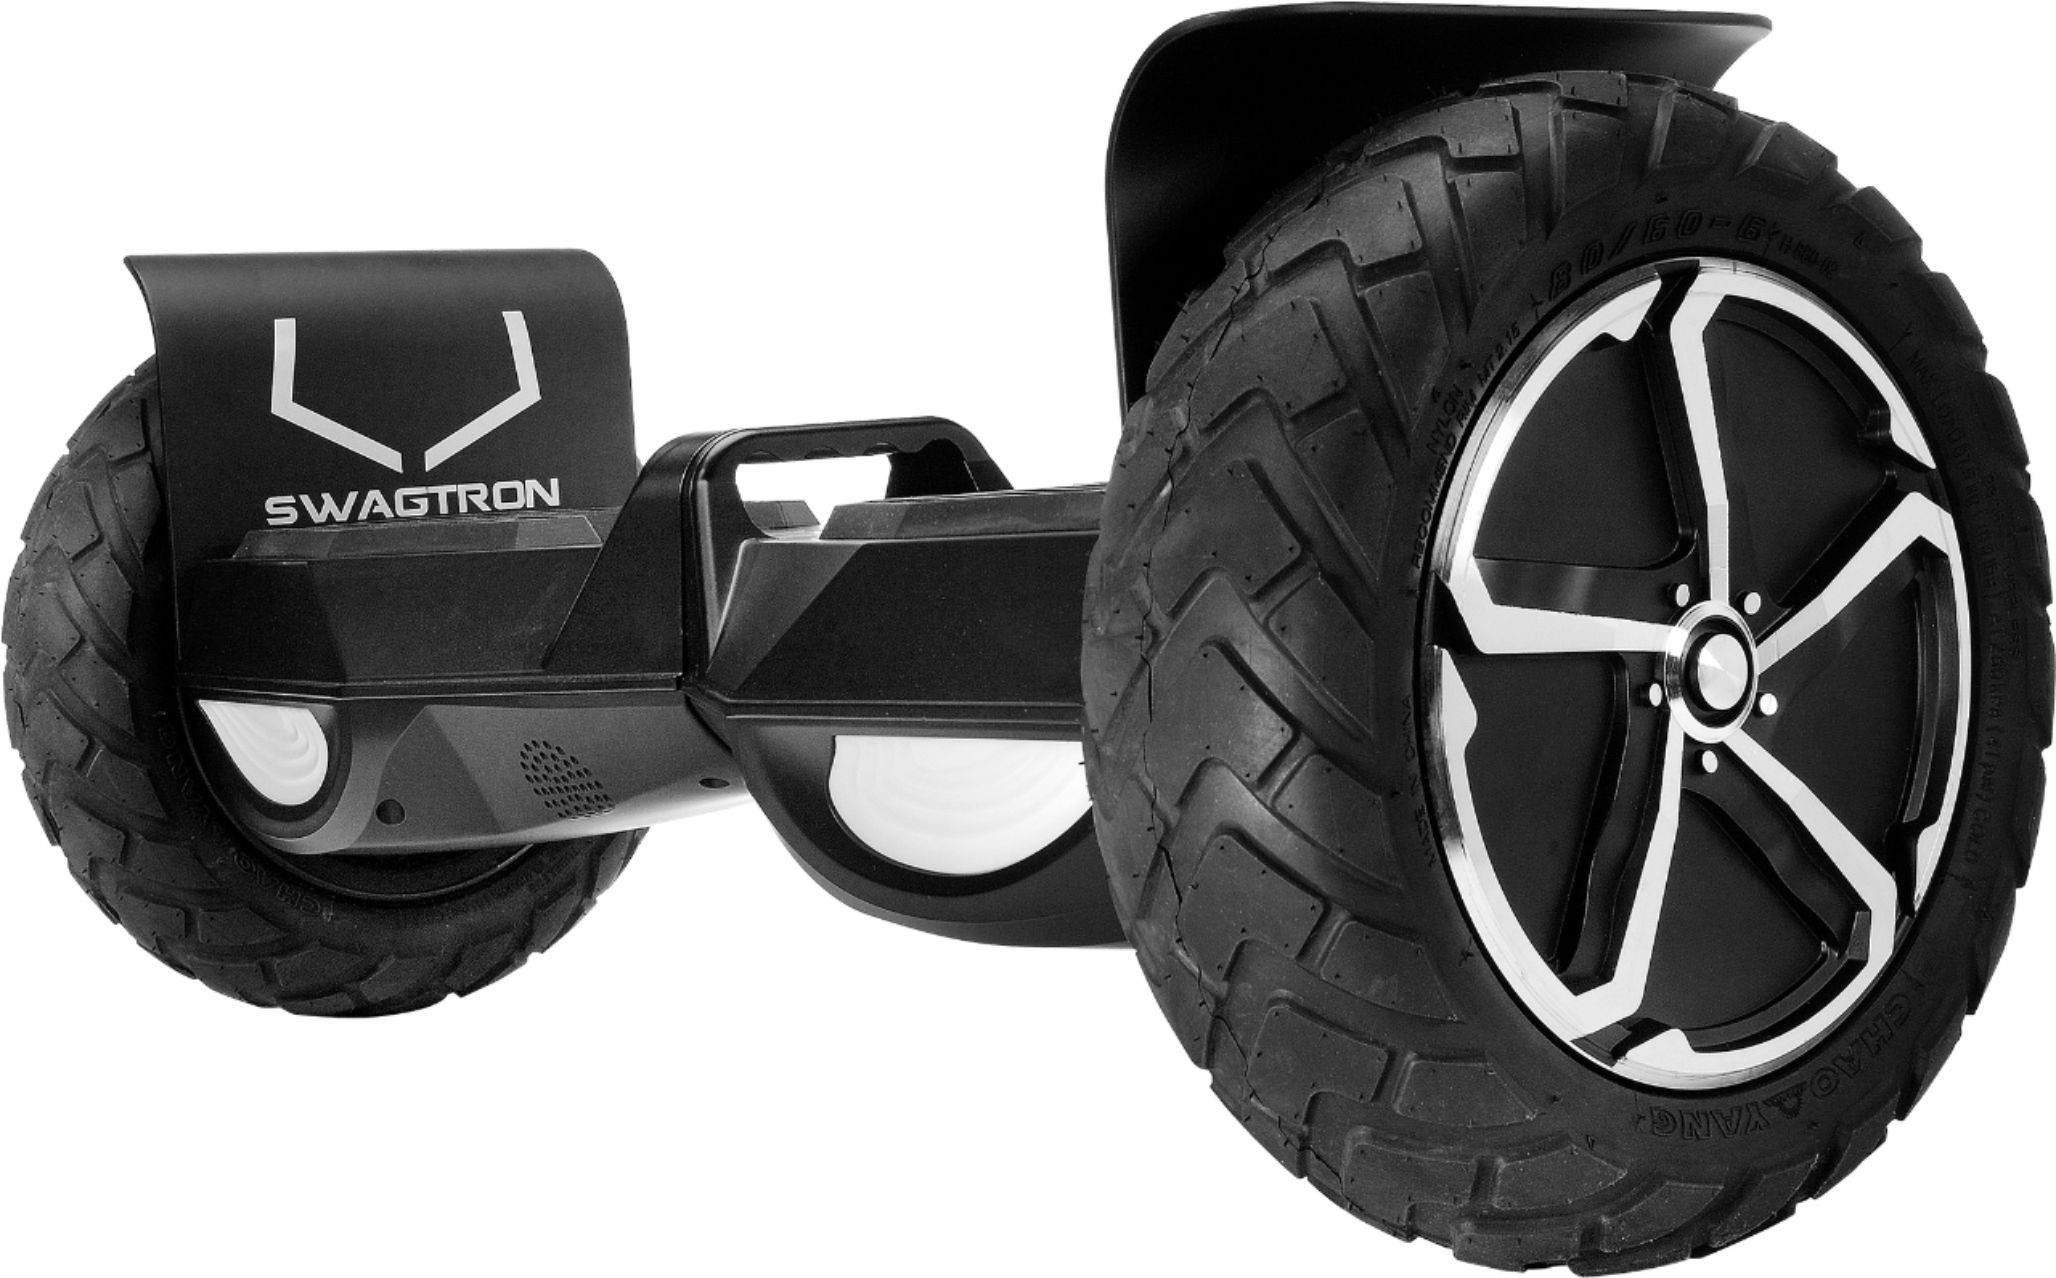 Swagtron swagBOARD T6 Self-Balancing Scooter 12 Range Speeds up 12 mph Matte Black 83688-2 - Best Buy